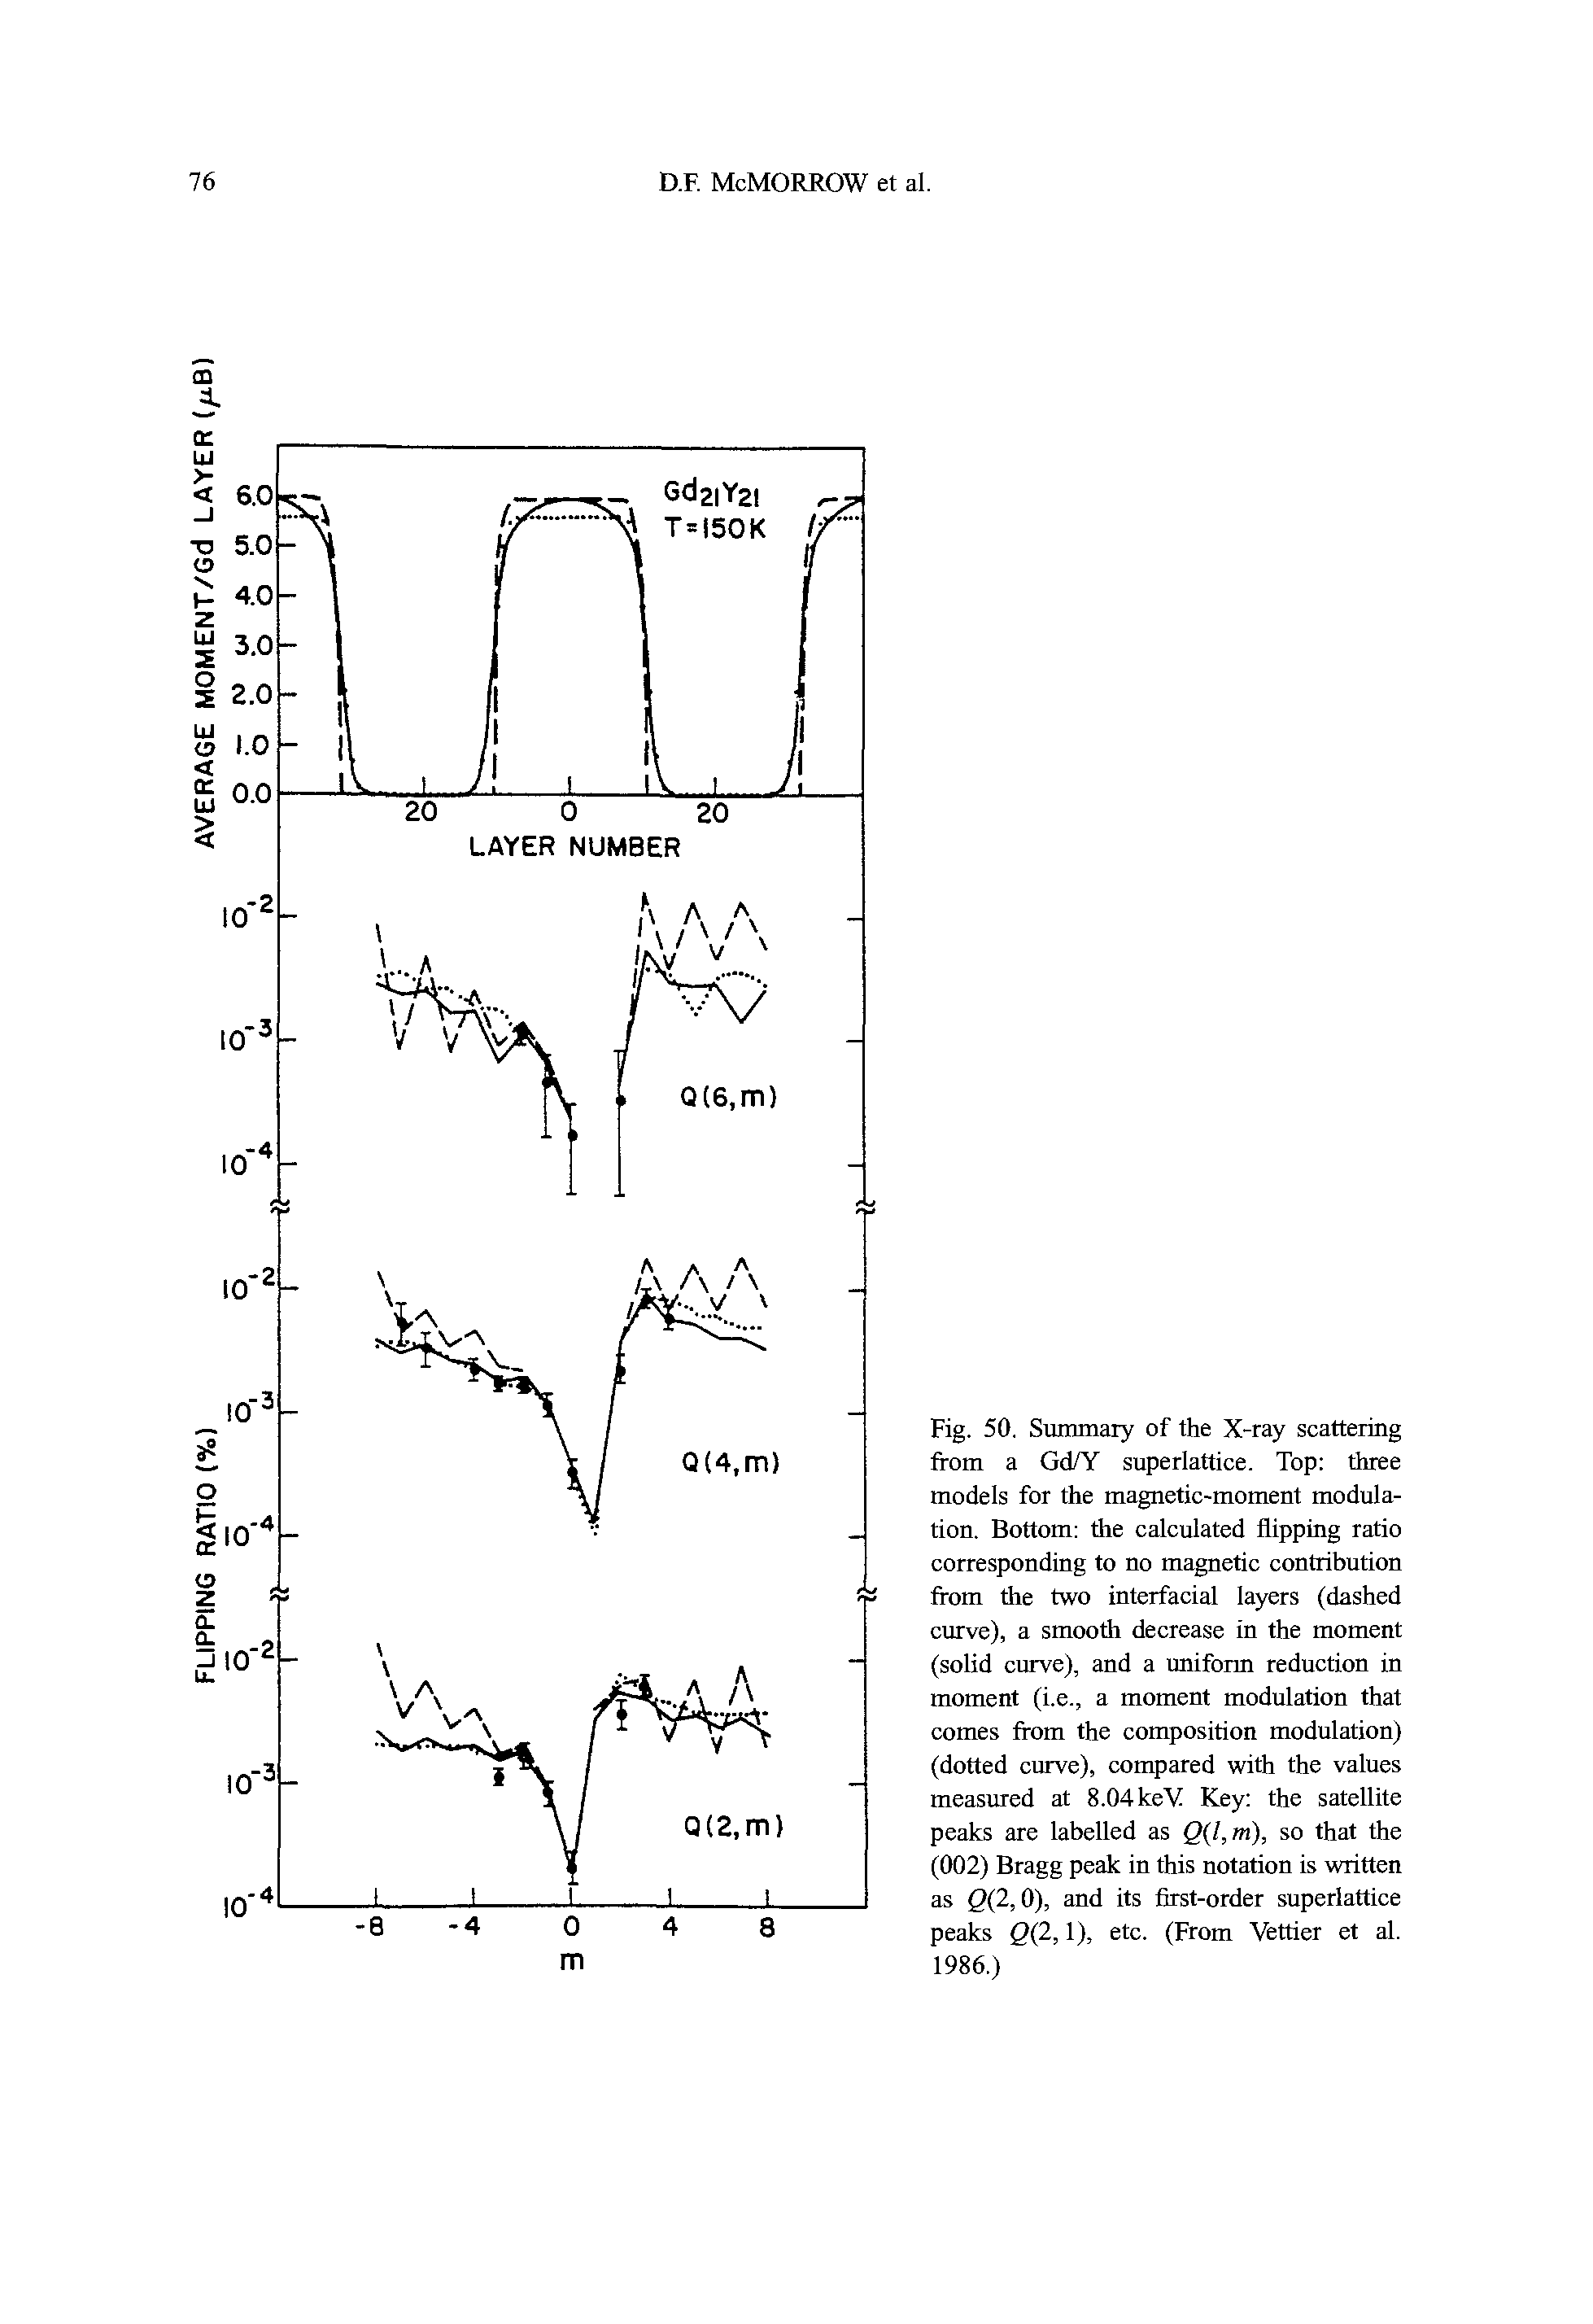 Fig. 50. Summary of the X-ray scattering from a GcFY superlattice. Top three models for the magnetic-moment modulation. Bottom the calculated flipping ratio corresponding to no magnetic contribution from the two interfacial layers (dashed curve), a smooth decrease in the moment (solid curve), and a uniform reduction in moment (i.e., a moment modulation that comes from the composition modulation) (dotted curve), compared with the values measured at 8.04 keV Key the satellite peaks are labelled as Q l,m), so that the (002) Bragg peak in this notation is written as Q 2,0), and its first-order superlattice peaks Q 2,1), etc. (From Vettier et al. 1986.)...